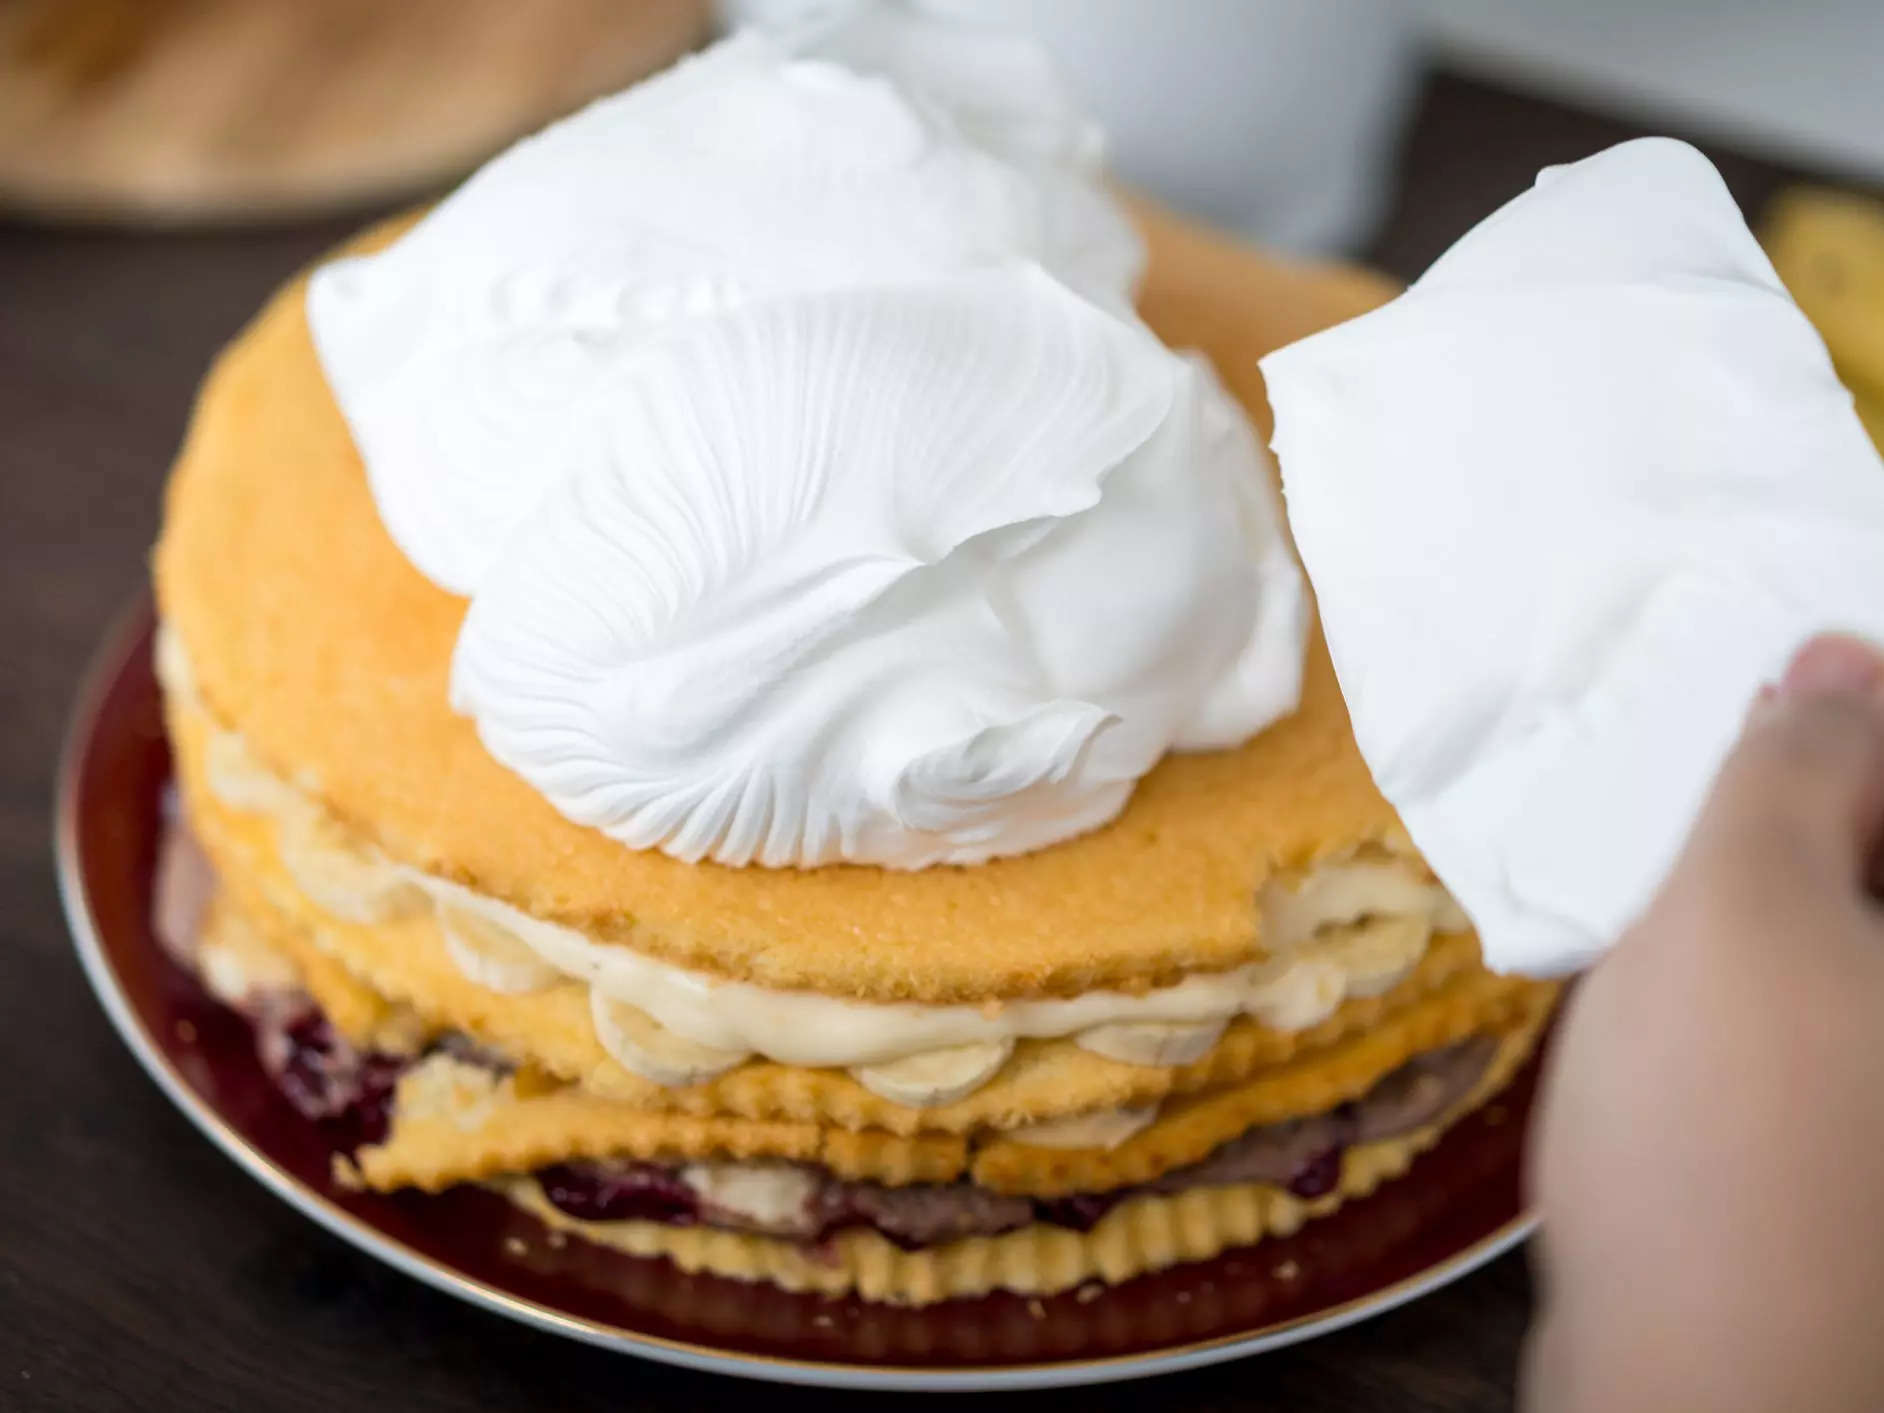 frosting a cake with whipped cream